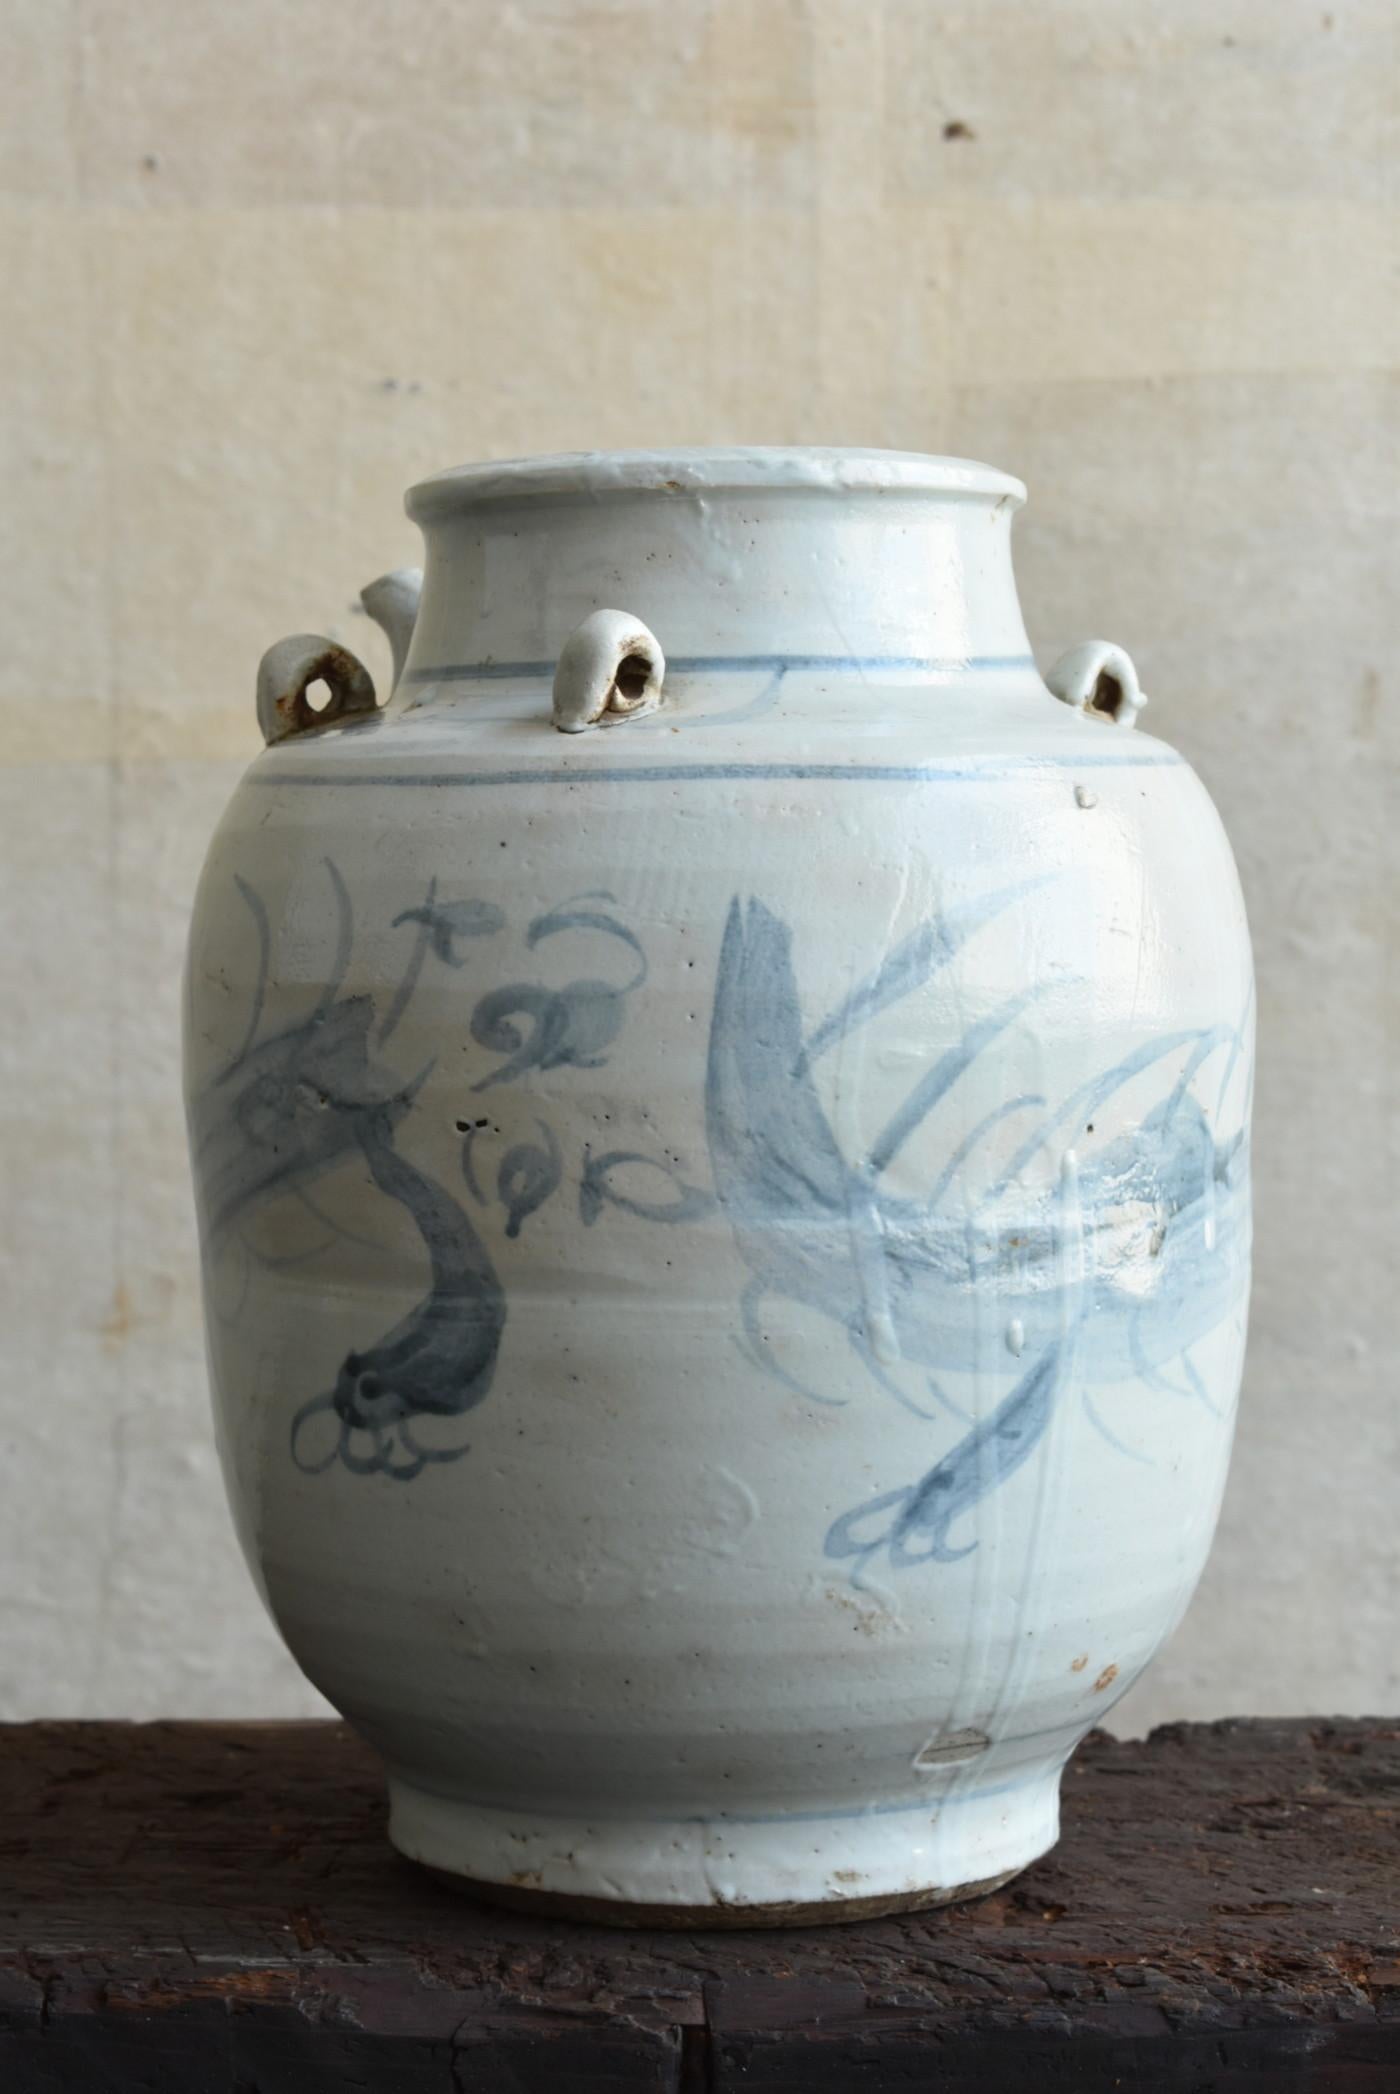 This is a white porcelain vase made in the late Qing Dynasty of China.
Made around the 19th century.
It has an interesting shape with four ears and a spout.

The pattern drawn on the whole vessel is a dragon.
It is drawn vigorously with a brush and